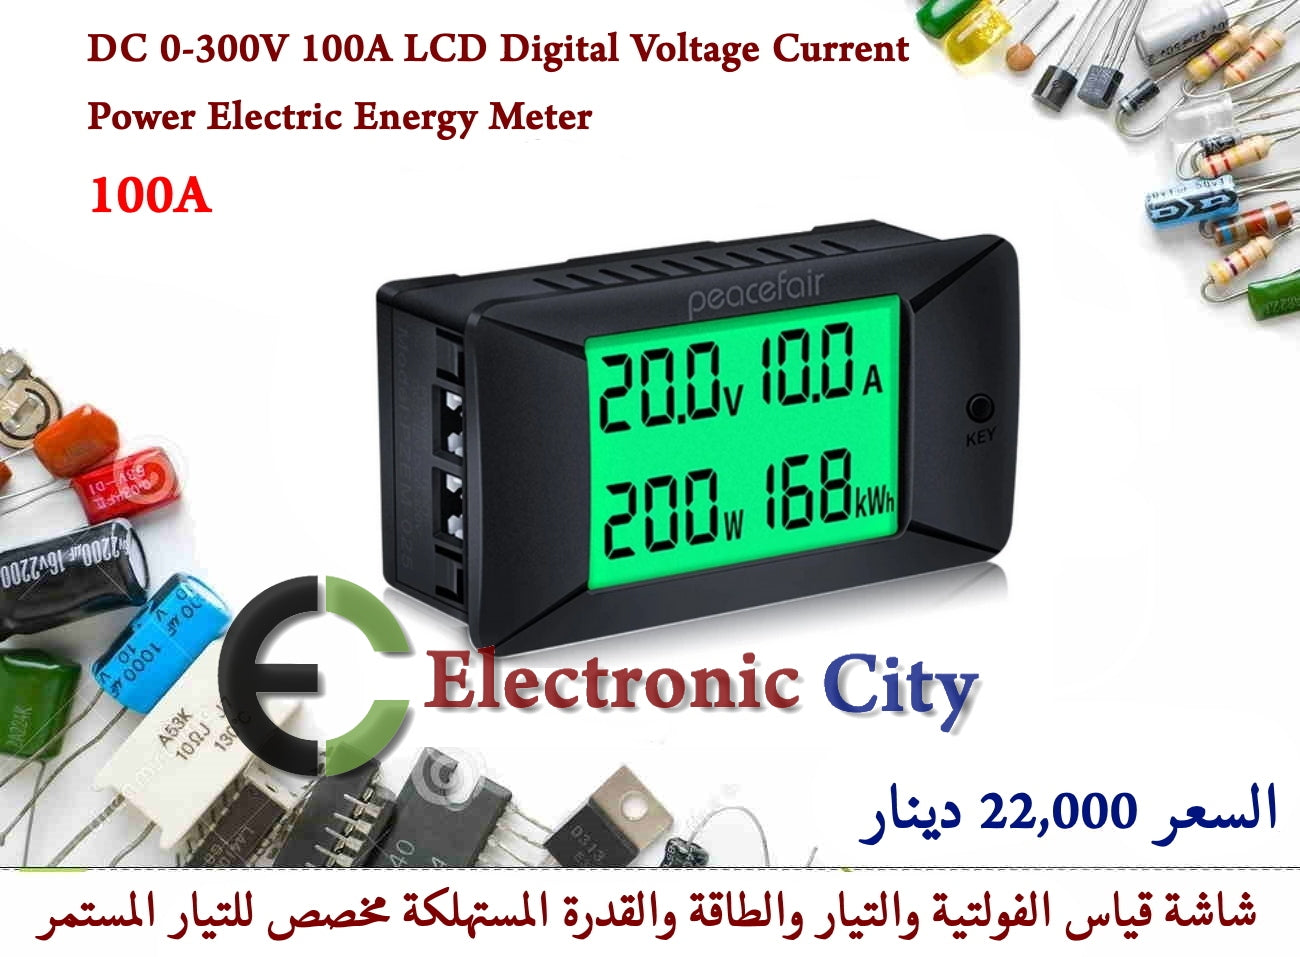 DC 0-300V 100A LCD Digital Voltage Current Power Electric Energy Meter